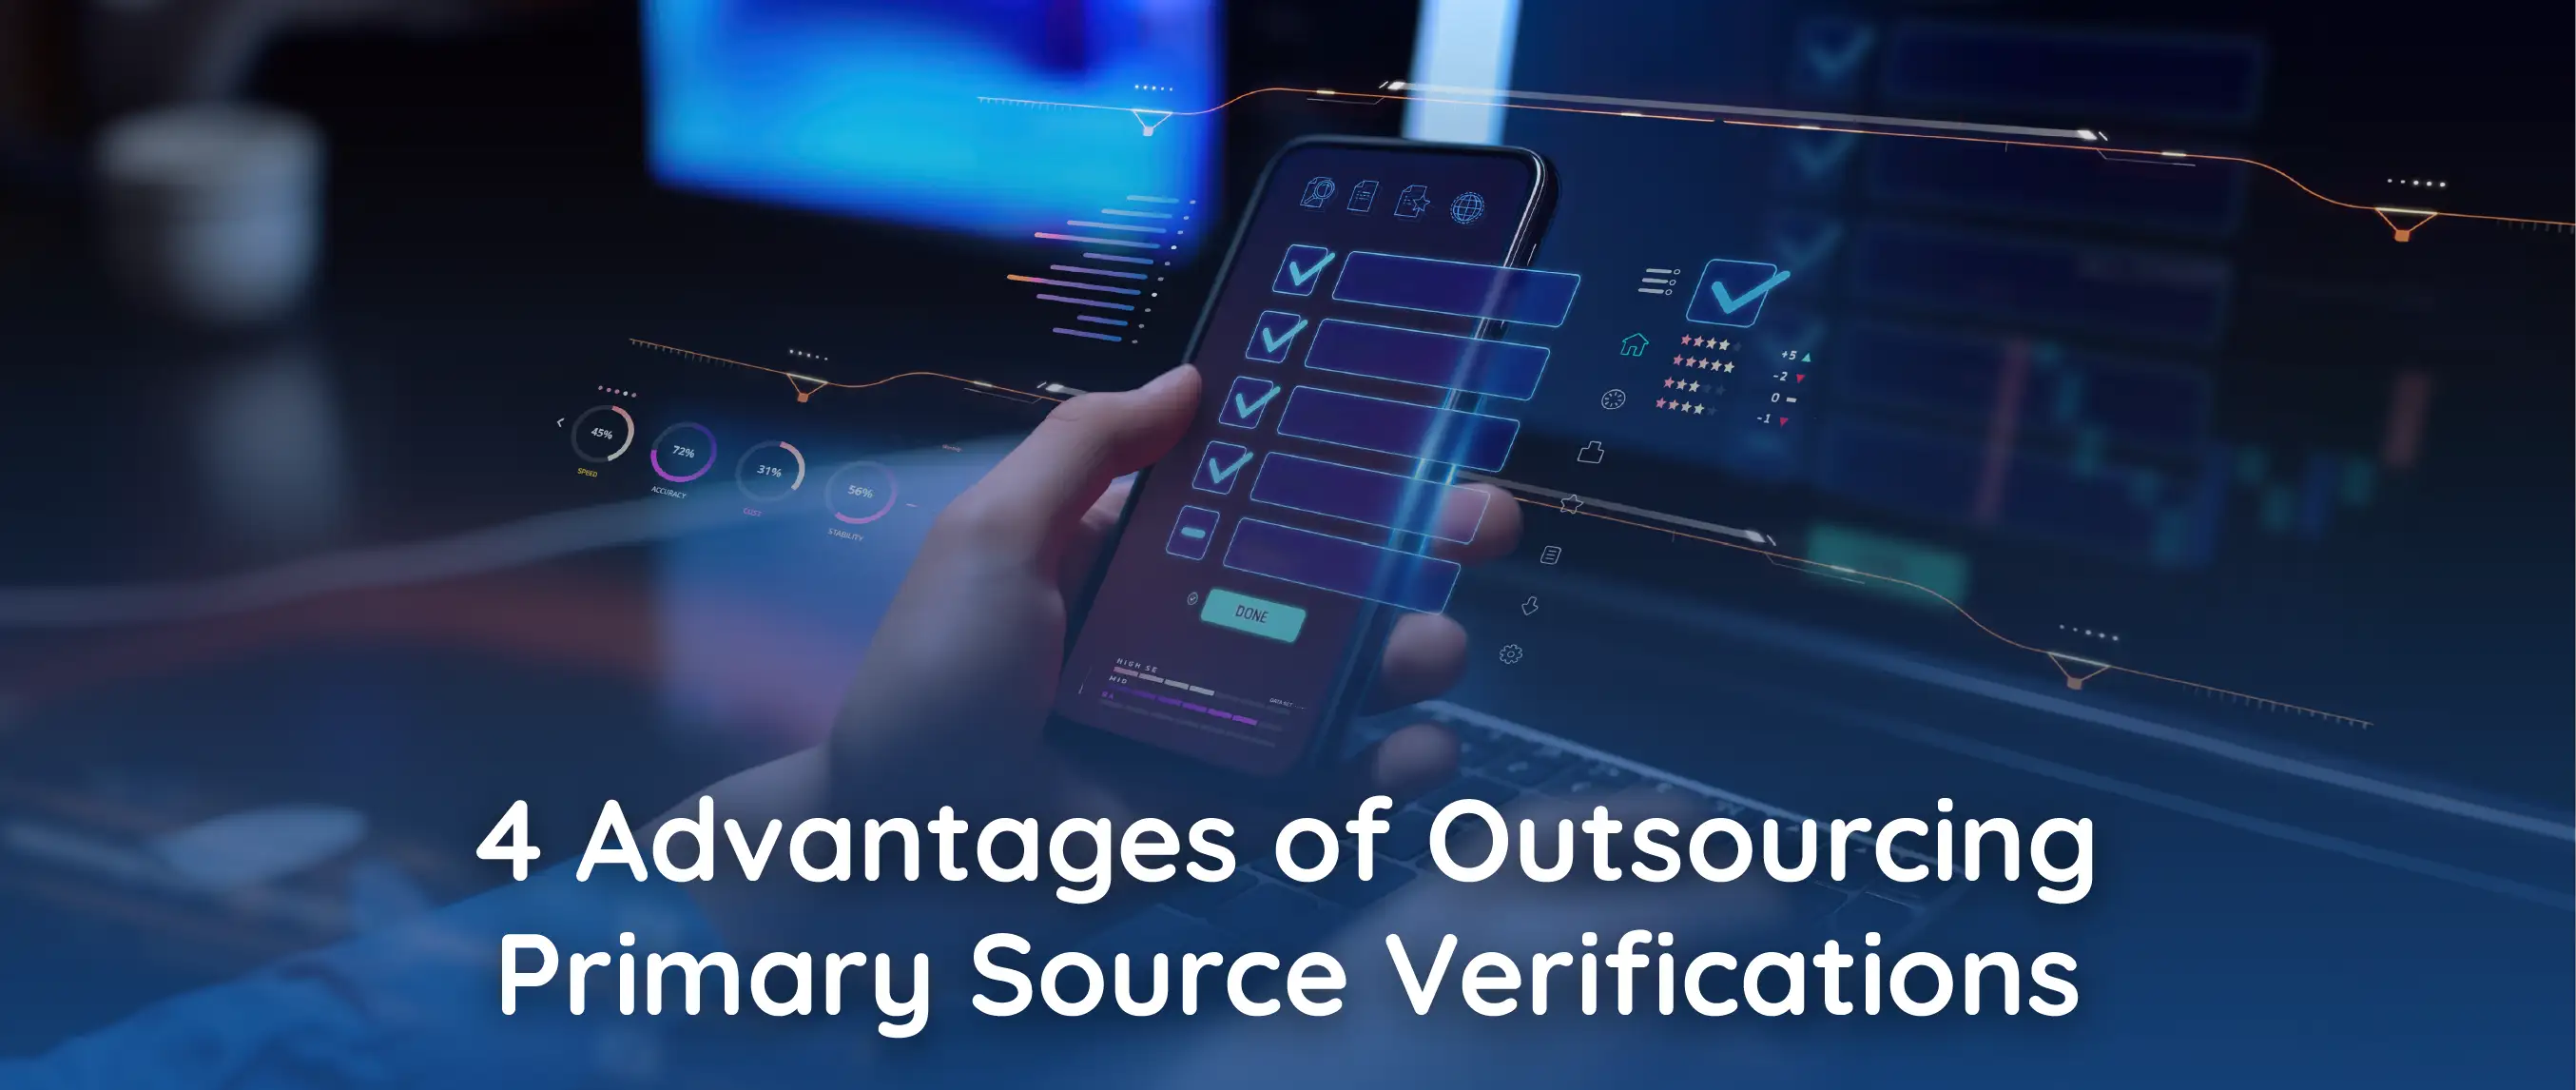 4 Advantages of Outsourcing Primary Source Verifications